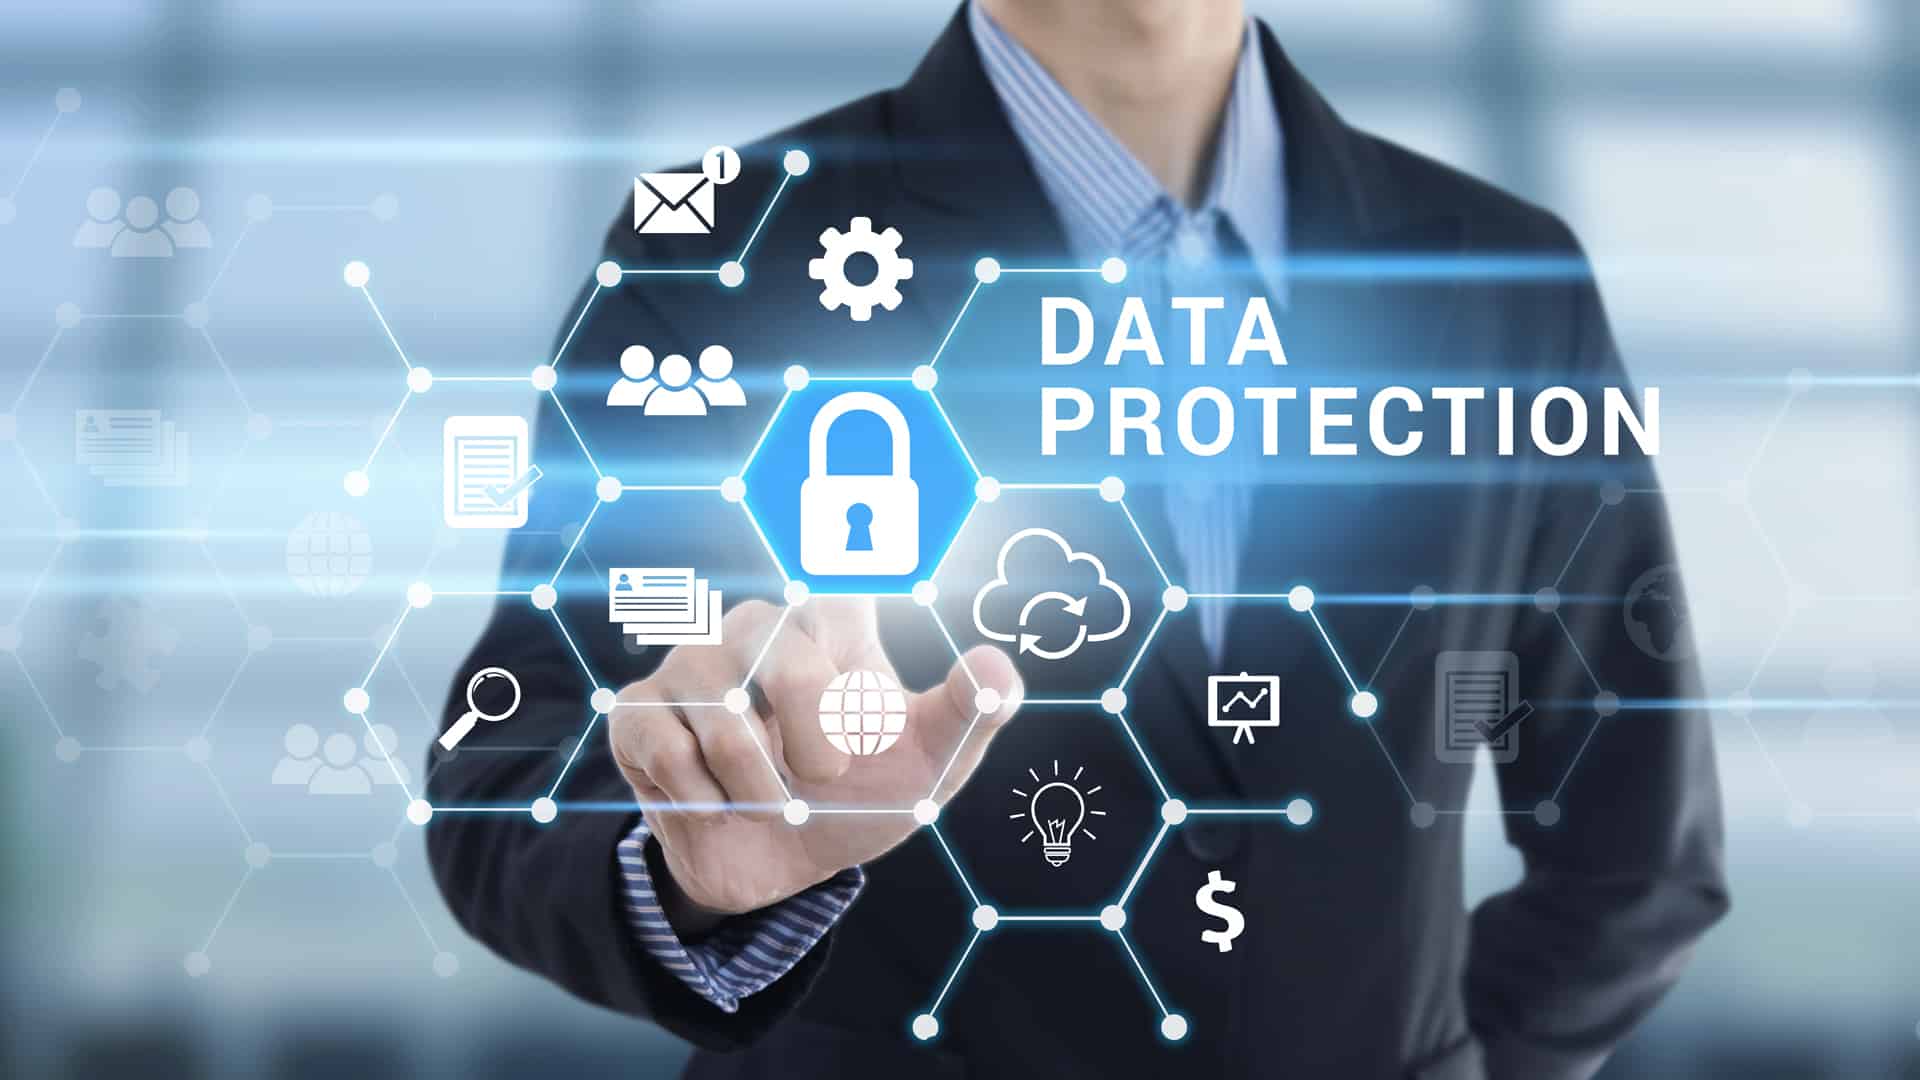 Data protection bill to solidify India's position as a global innovation hub: Nasscom